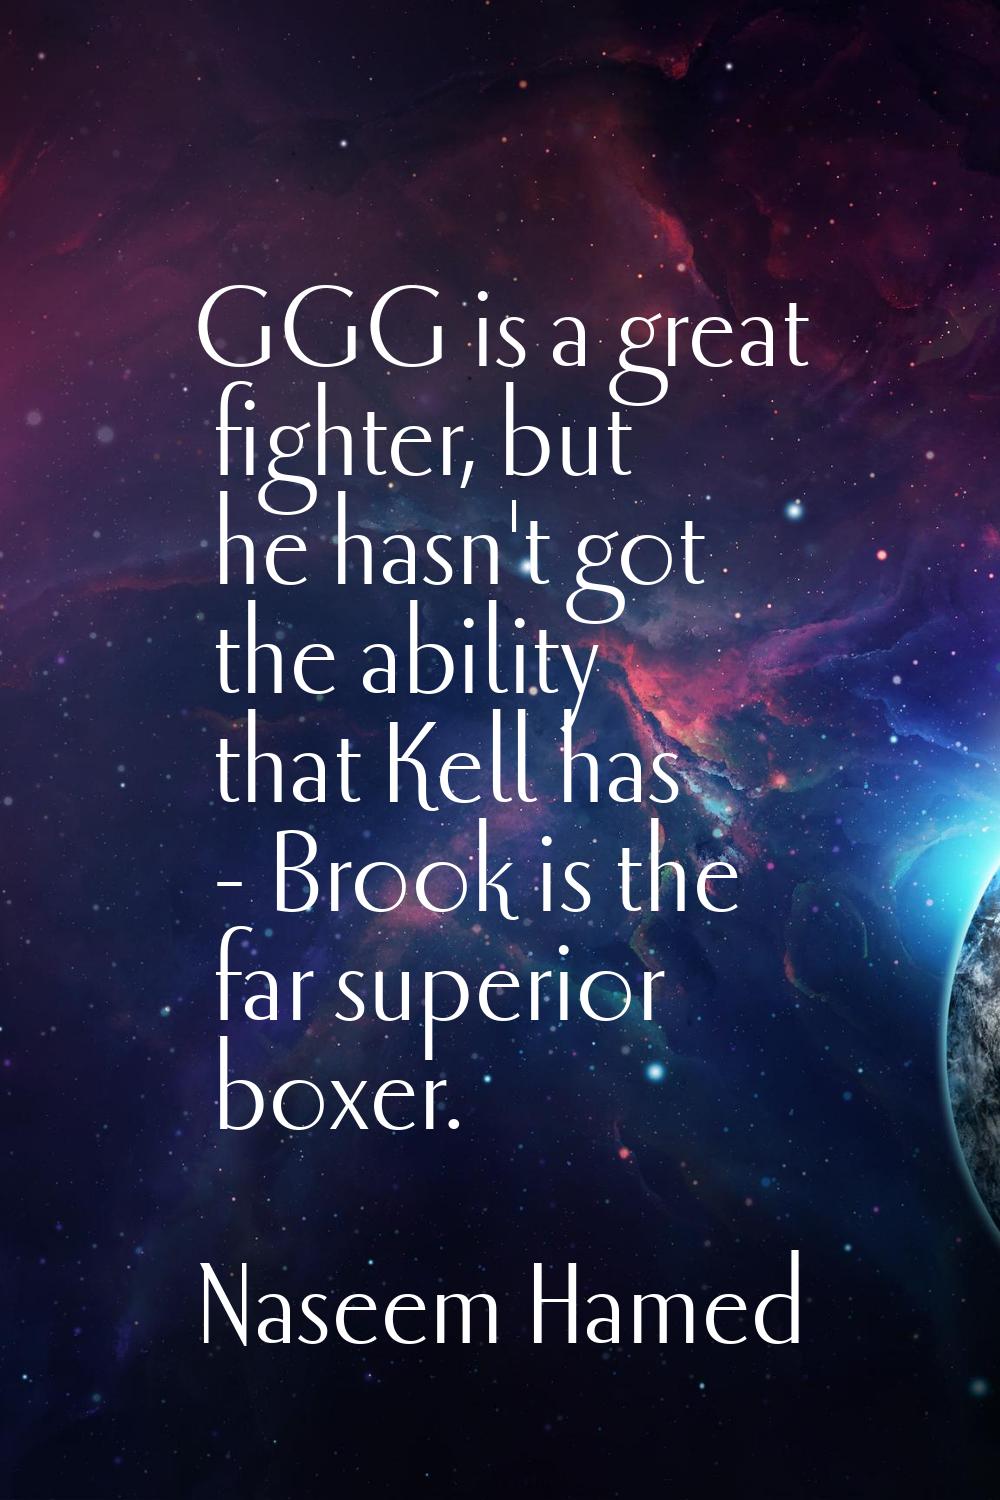 GGG is a great fighter, but he hasn't got the ability that Kell has - Brook is the far superior box